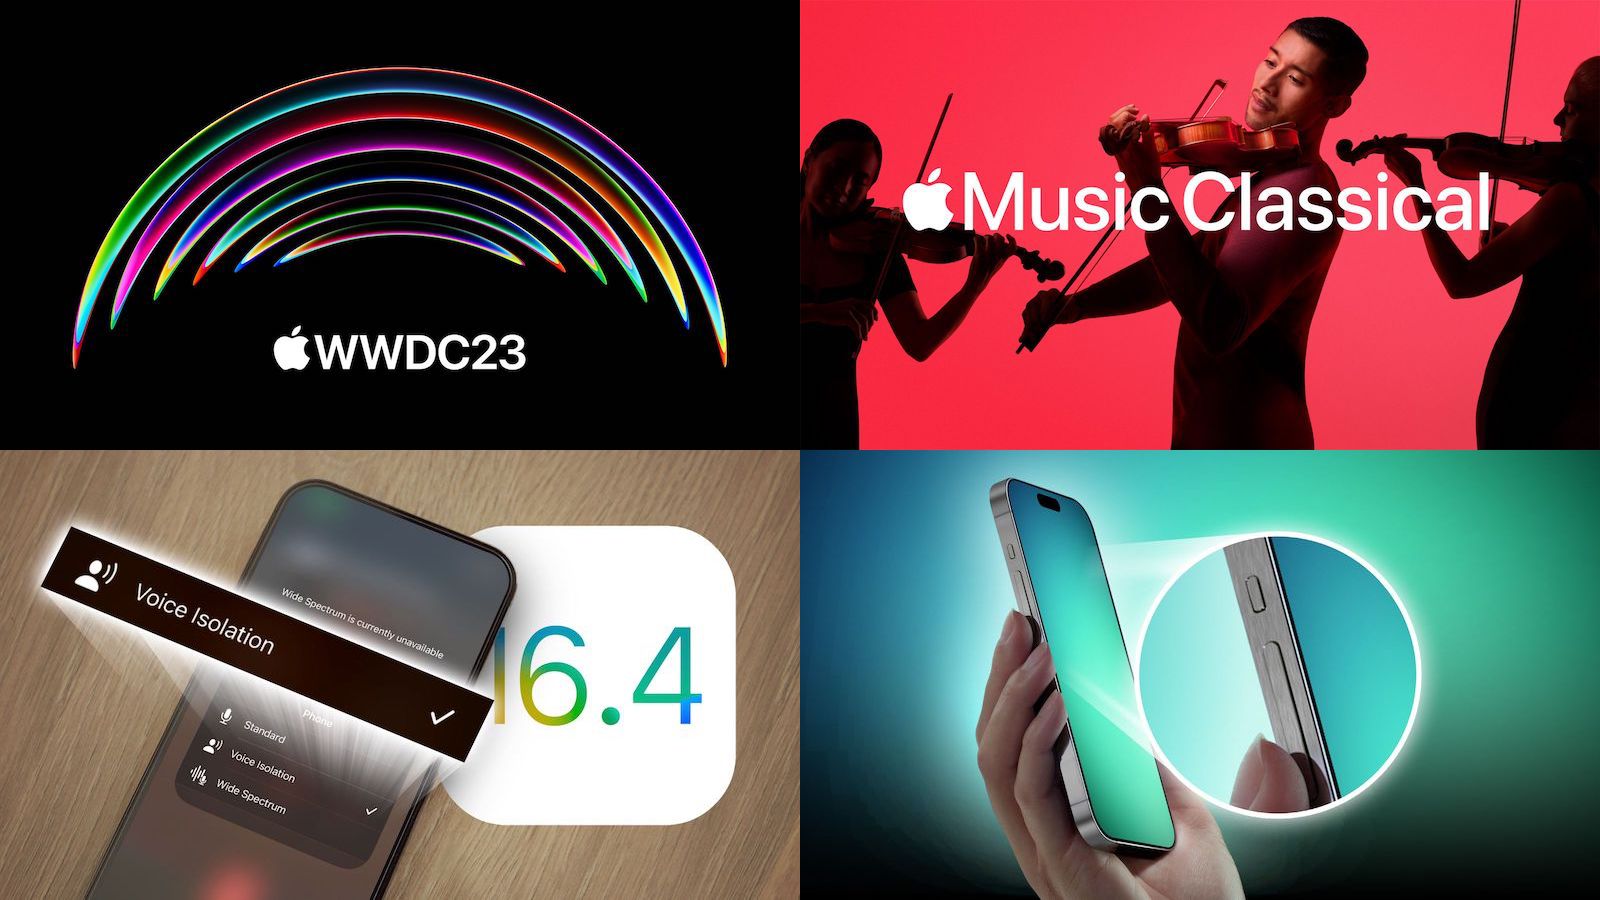 photo of Top Stories: WWDC Announced, iOS 16.4 Released, Apple Music Classical Now Available image